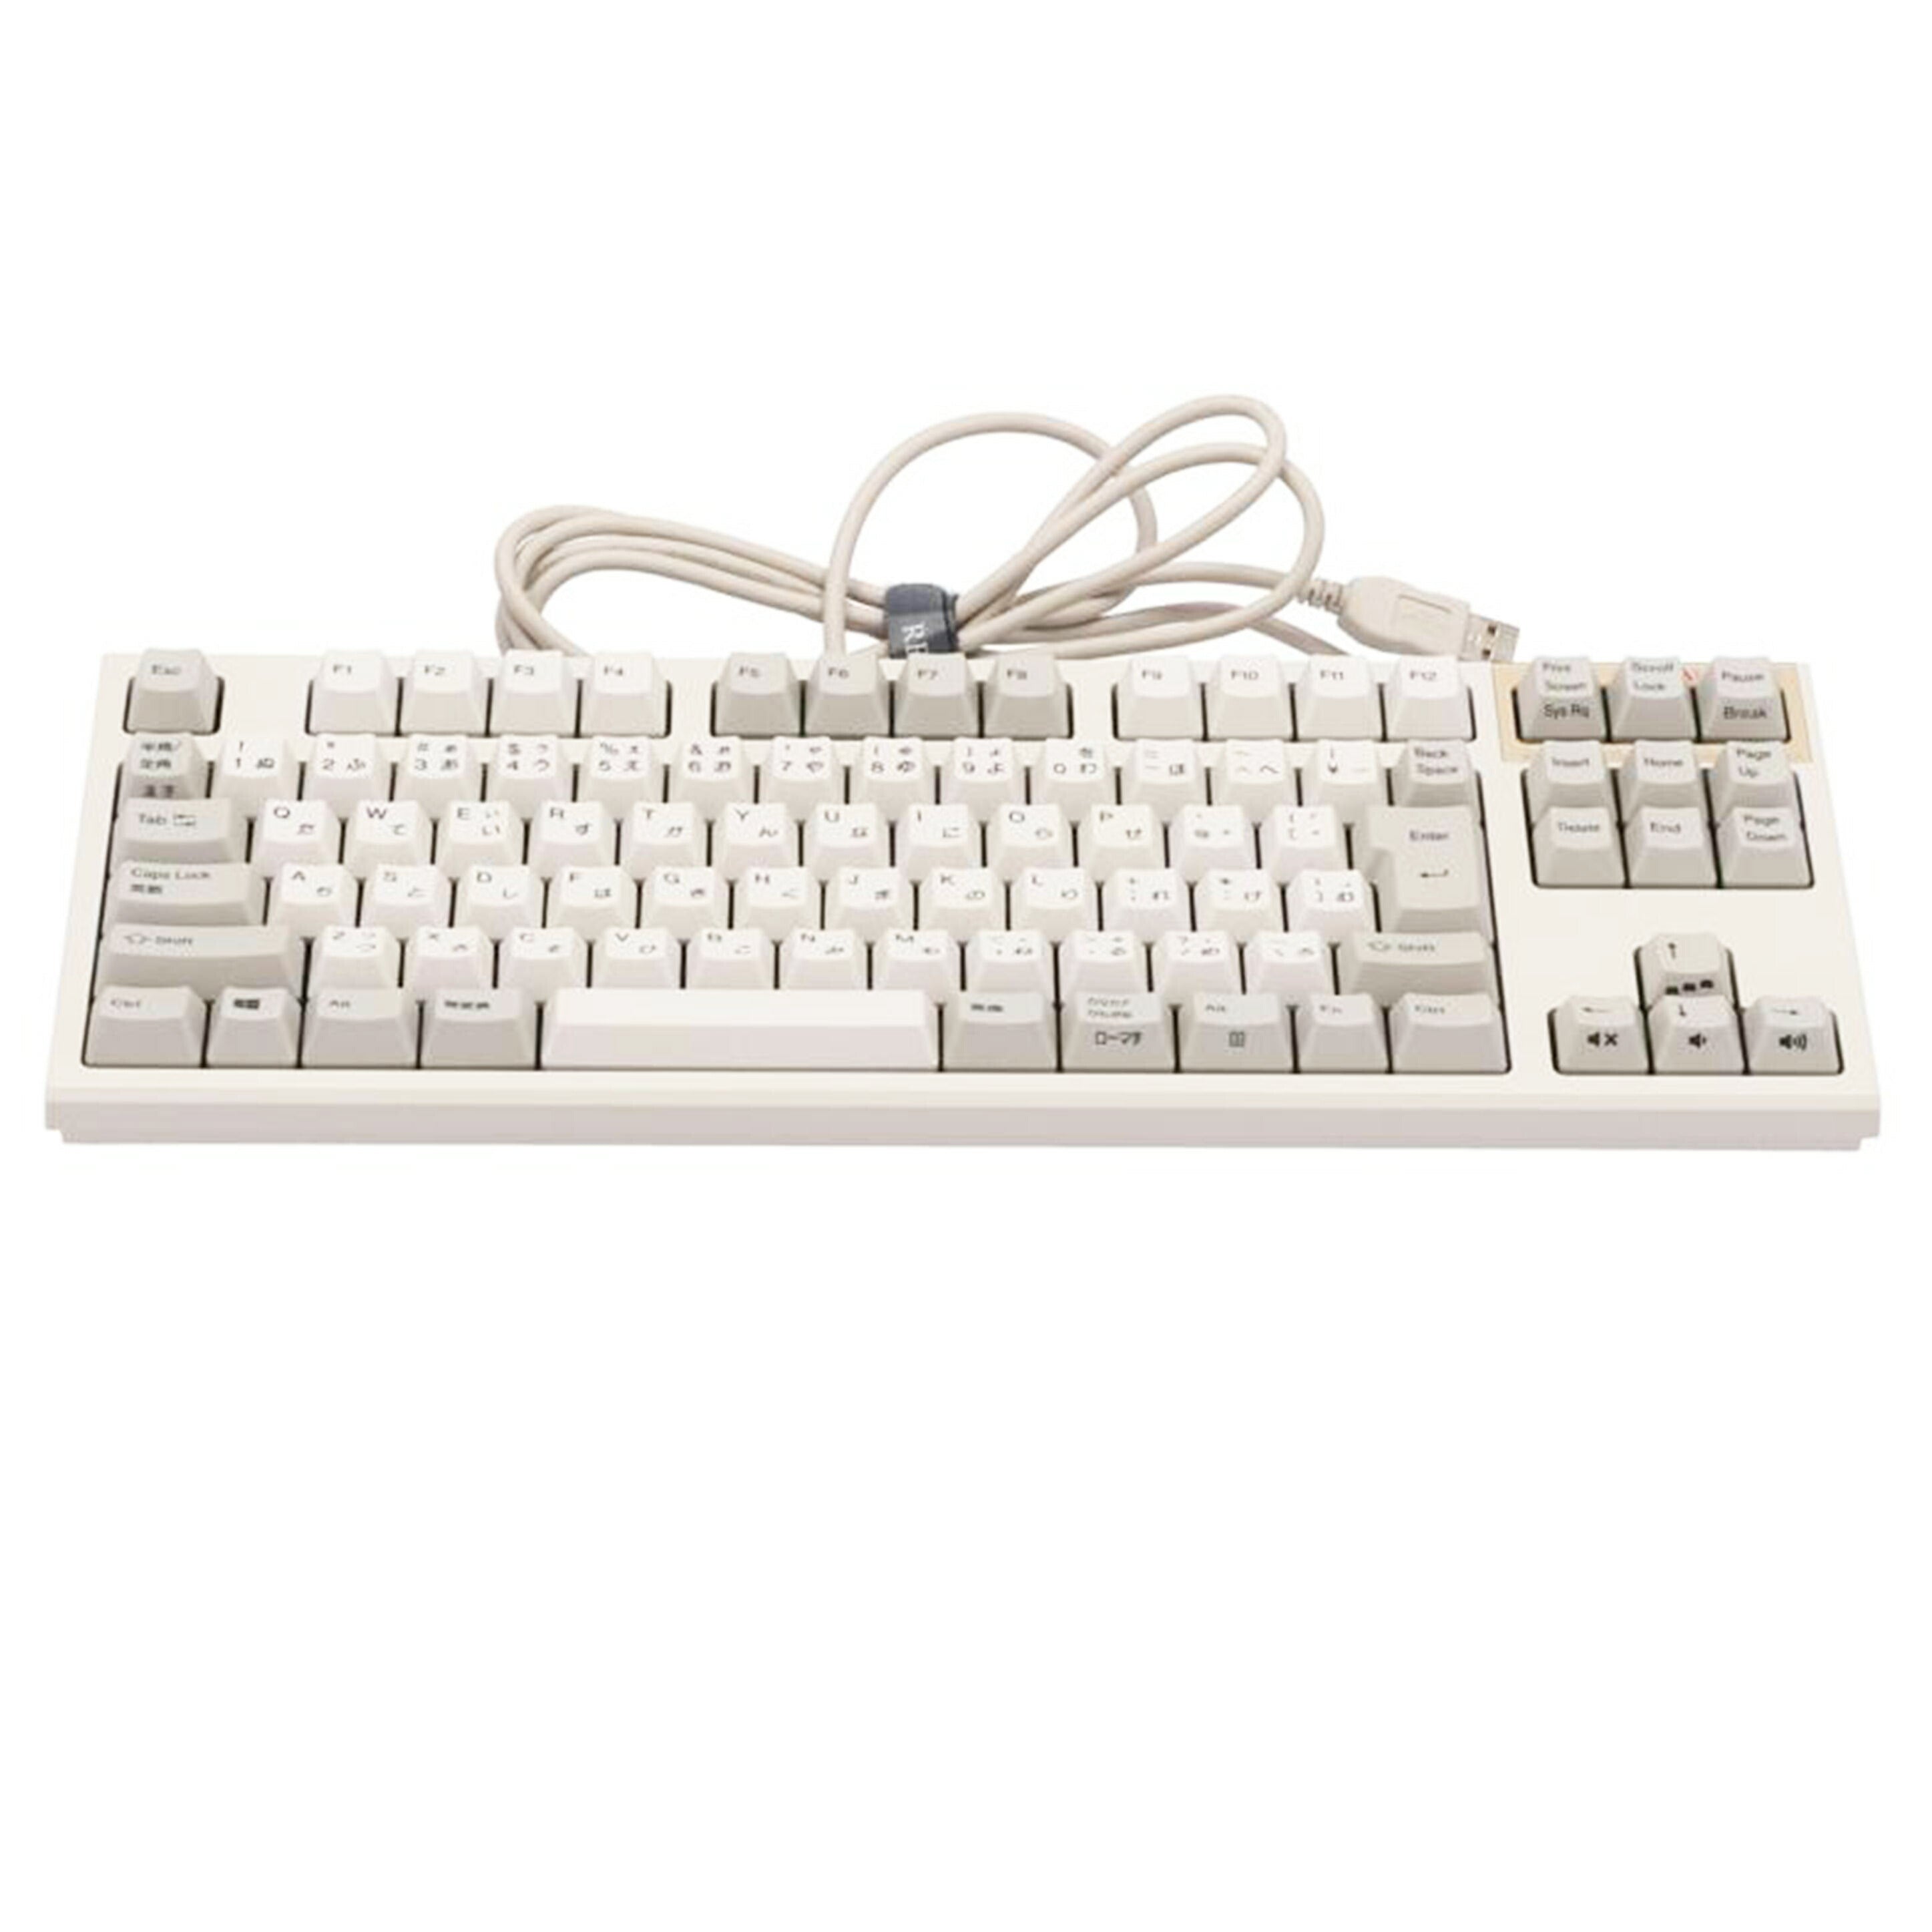 Ｔｏｐｒｅ 東プレ/ＲＥＡＬＦＯＲＣＥ　キーボード/R2TLSA-JP3-IV//AHAZ08 A 210402132/Bランク/67